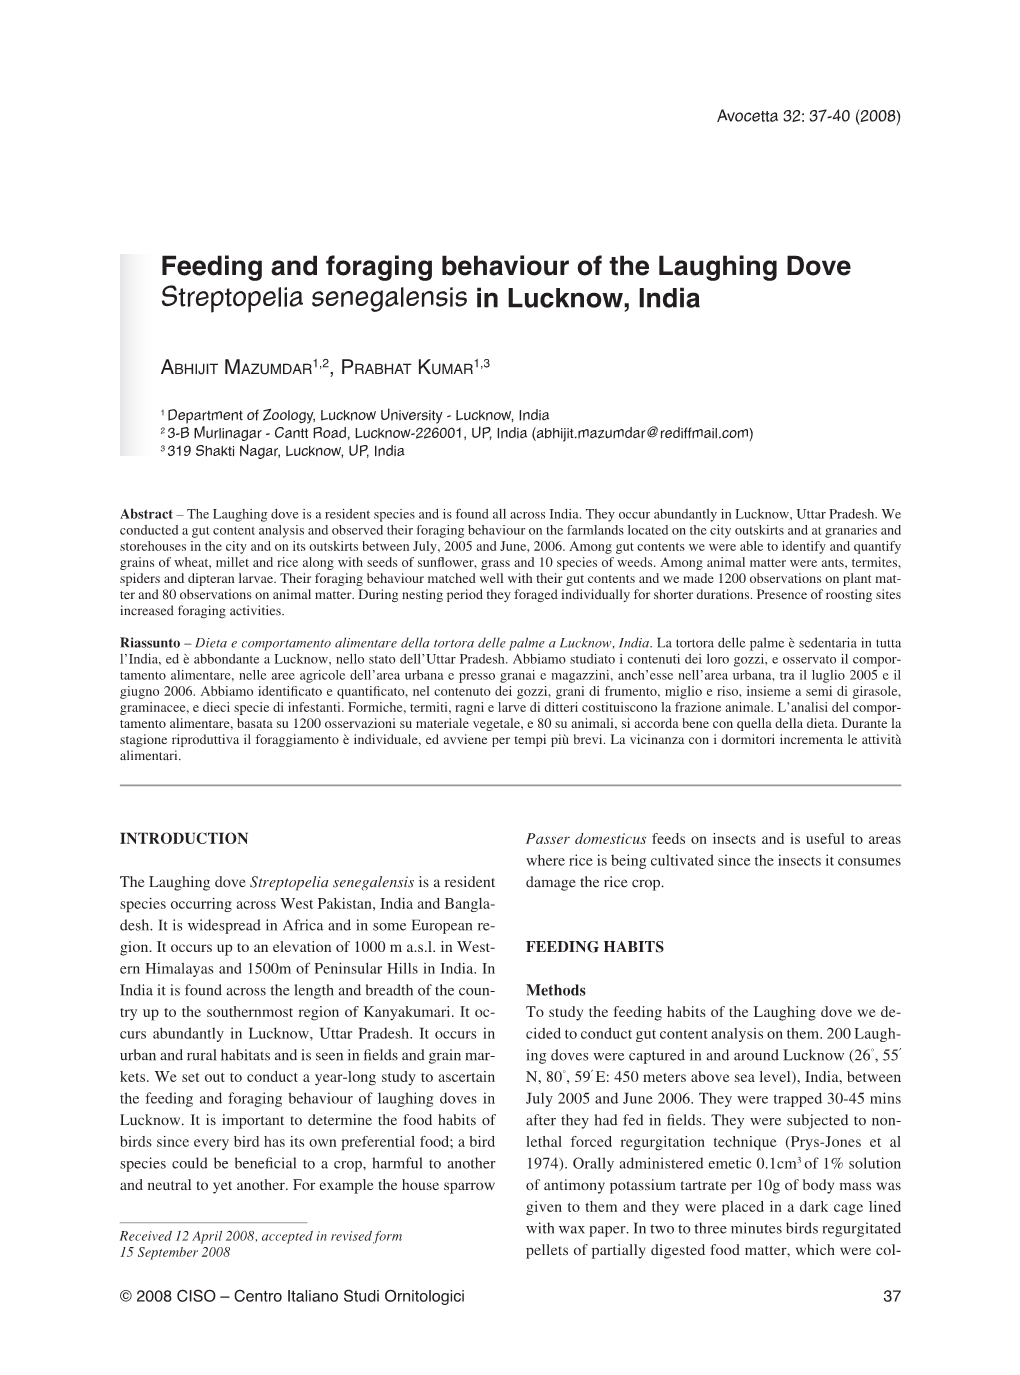 Feeding and Foraging Behaviour of the Laughing Dove Streptopelia Senegalensis in Lucknow, India